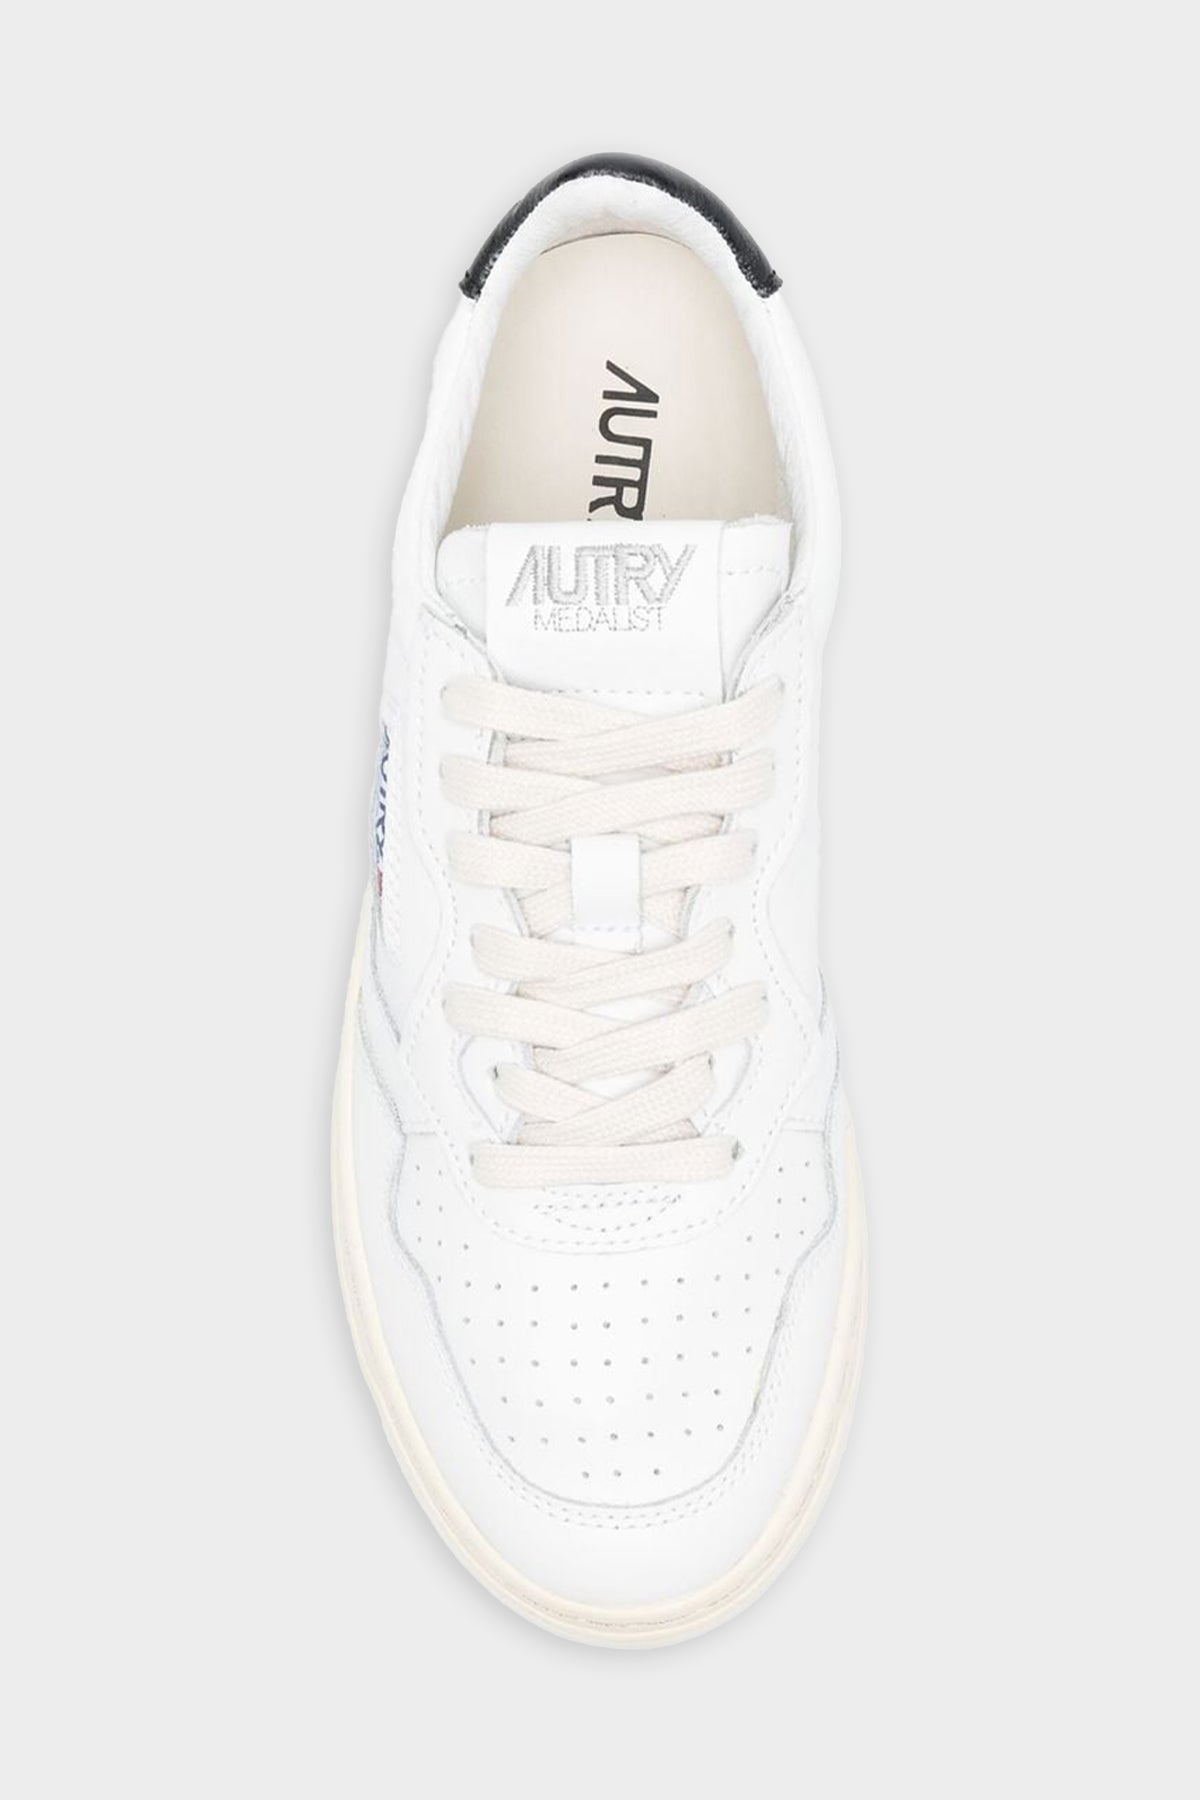 Medalist Low Leather Sneaker in White Black - shop-olivia.com